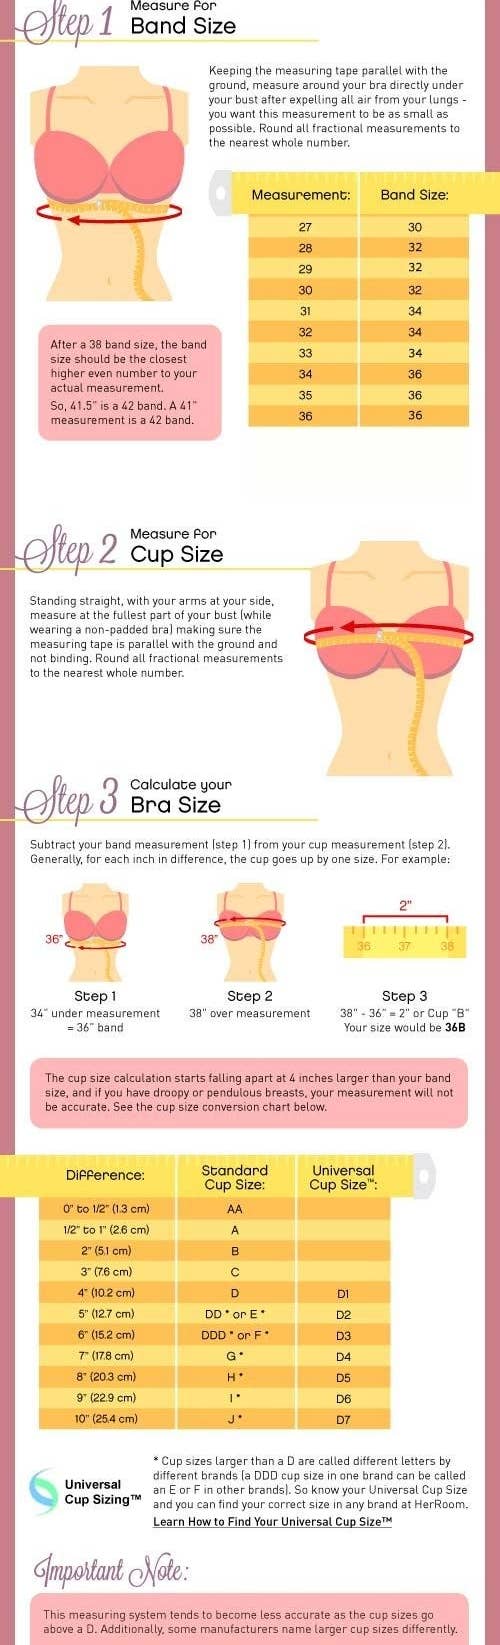 Aerie's Online Bra Fitting Guide: 30, 35, therefore 34-wait, what